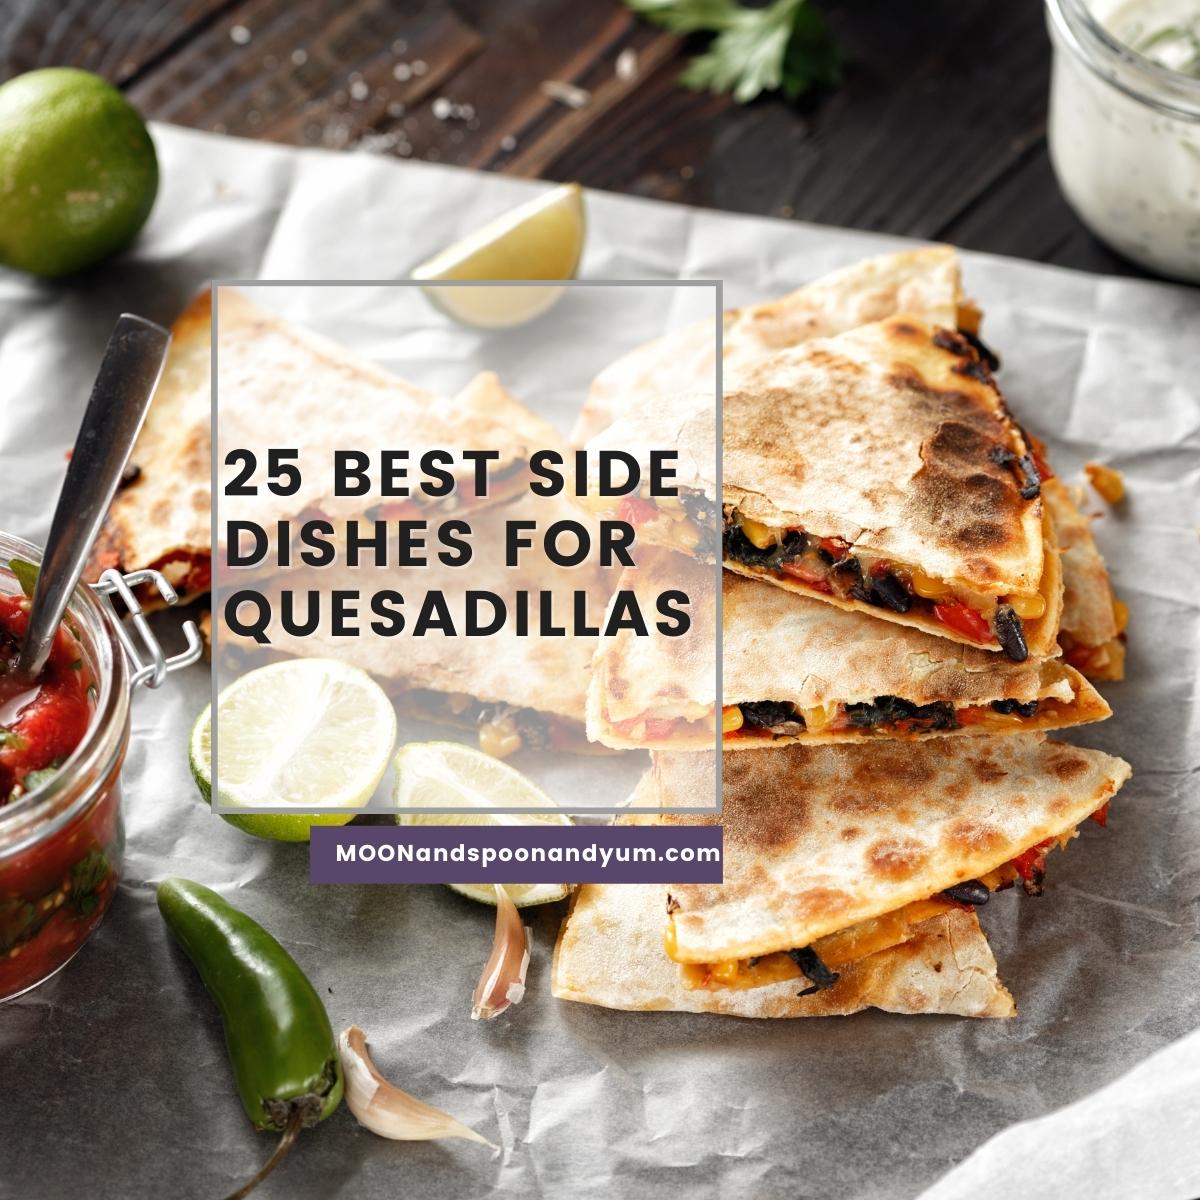 25 Amazing Side Dishes for Quesadillas